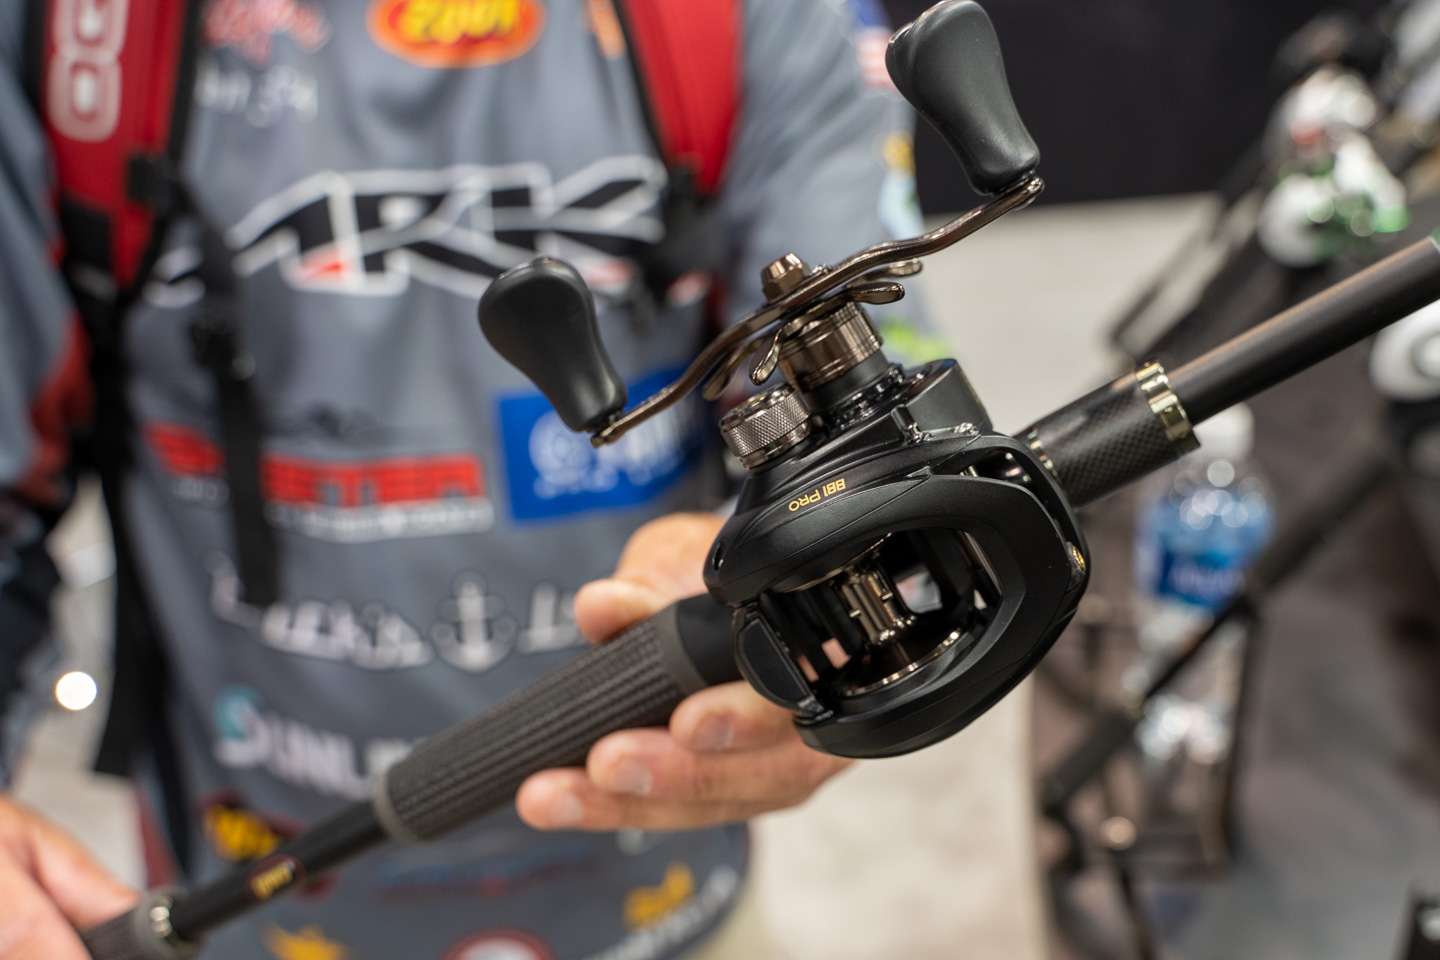 <b>Lew's BB1 Pro LFS Baitcasting Reel</b><br>
The Lew's BB1 is another reel that has long been one of the most popular on the market, but Lew's has upgraded the braking system as well as the line guide to make the new Pro LFS even greater. Offered in three different gear ratios. 